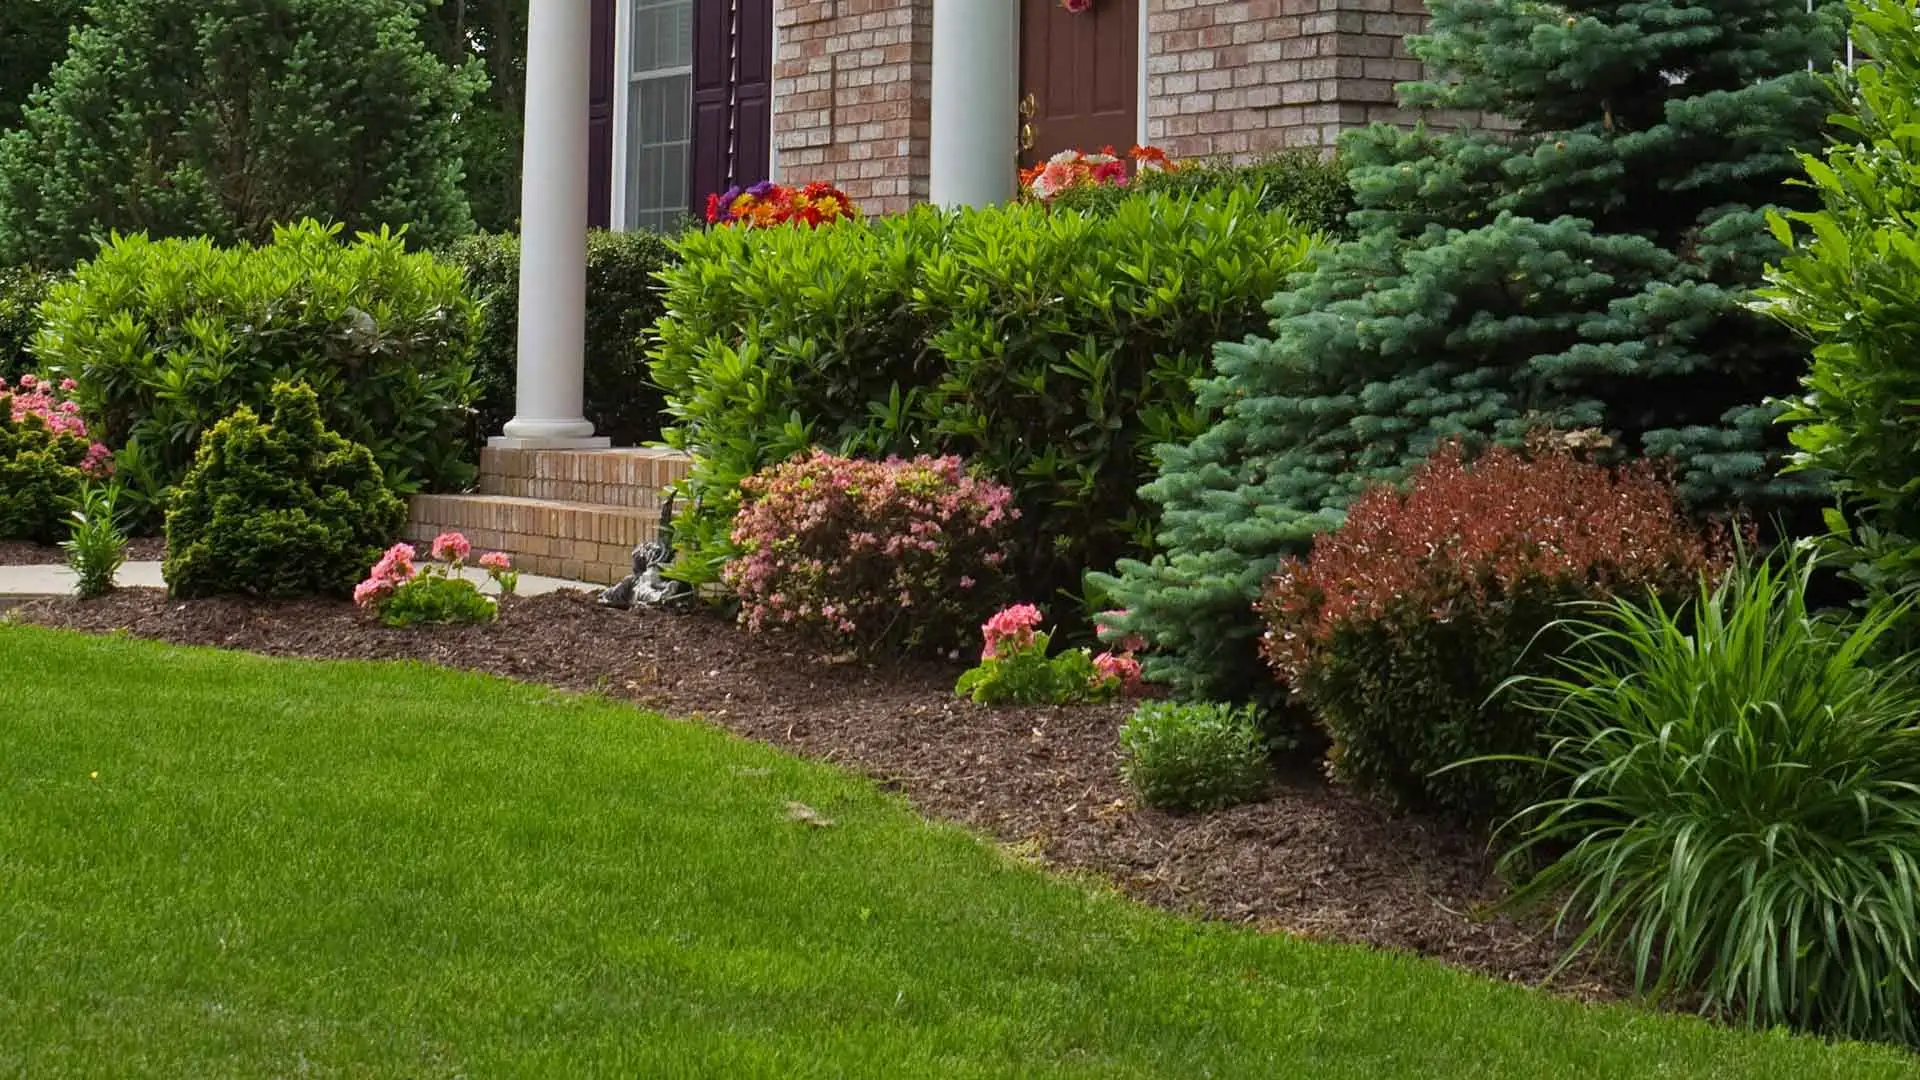 Lawn cared for at a residential property in Noblesville, IN.